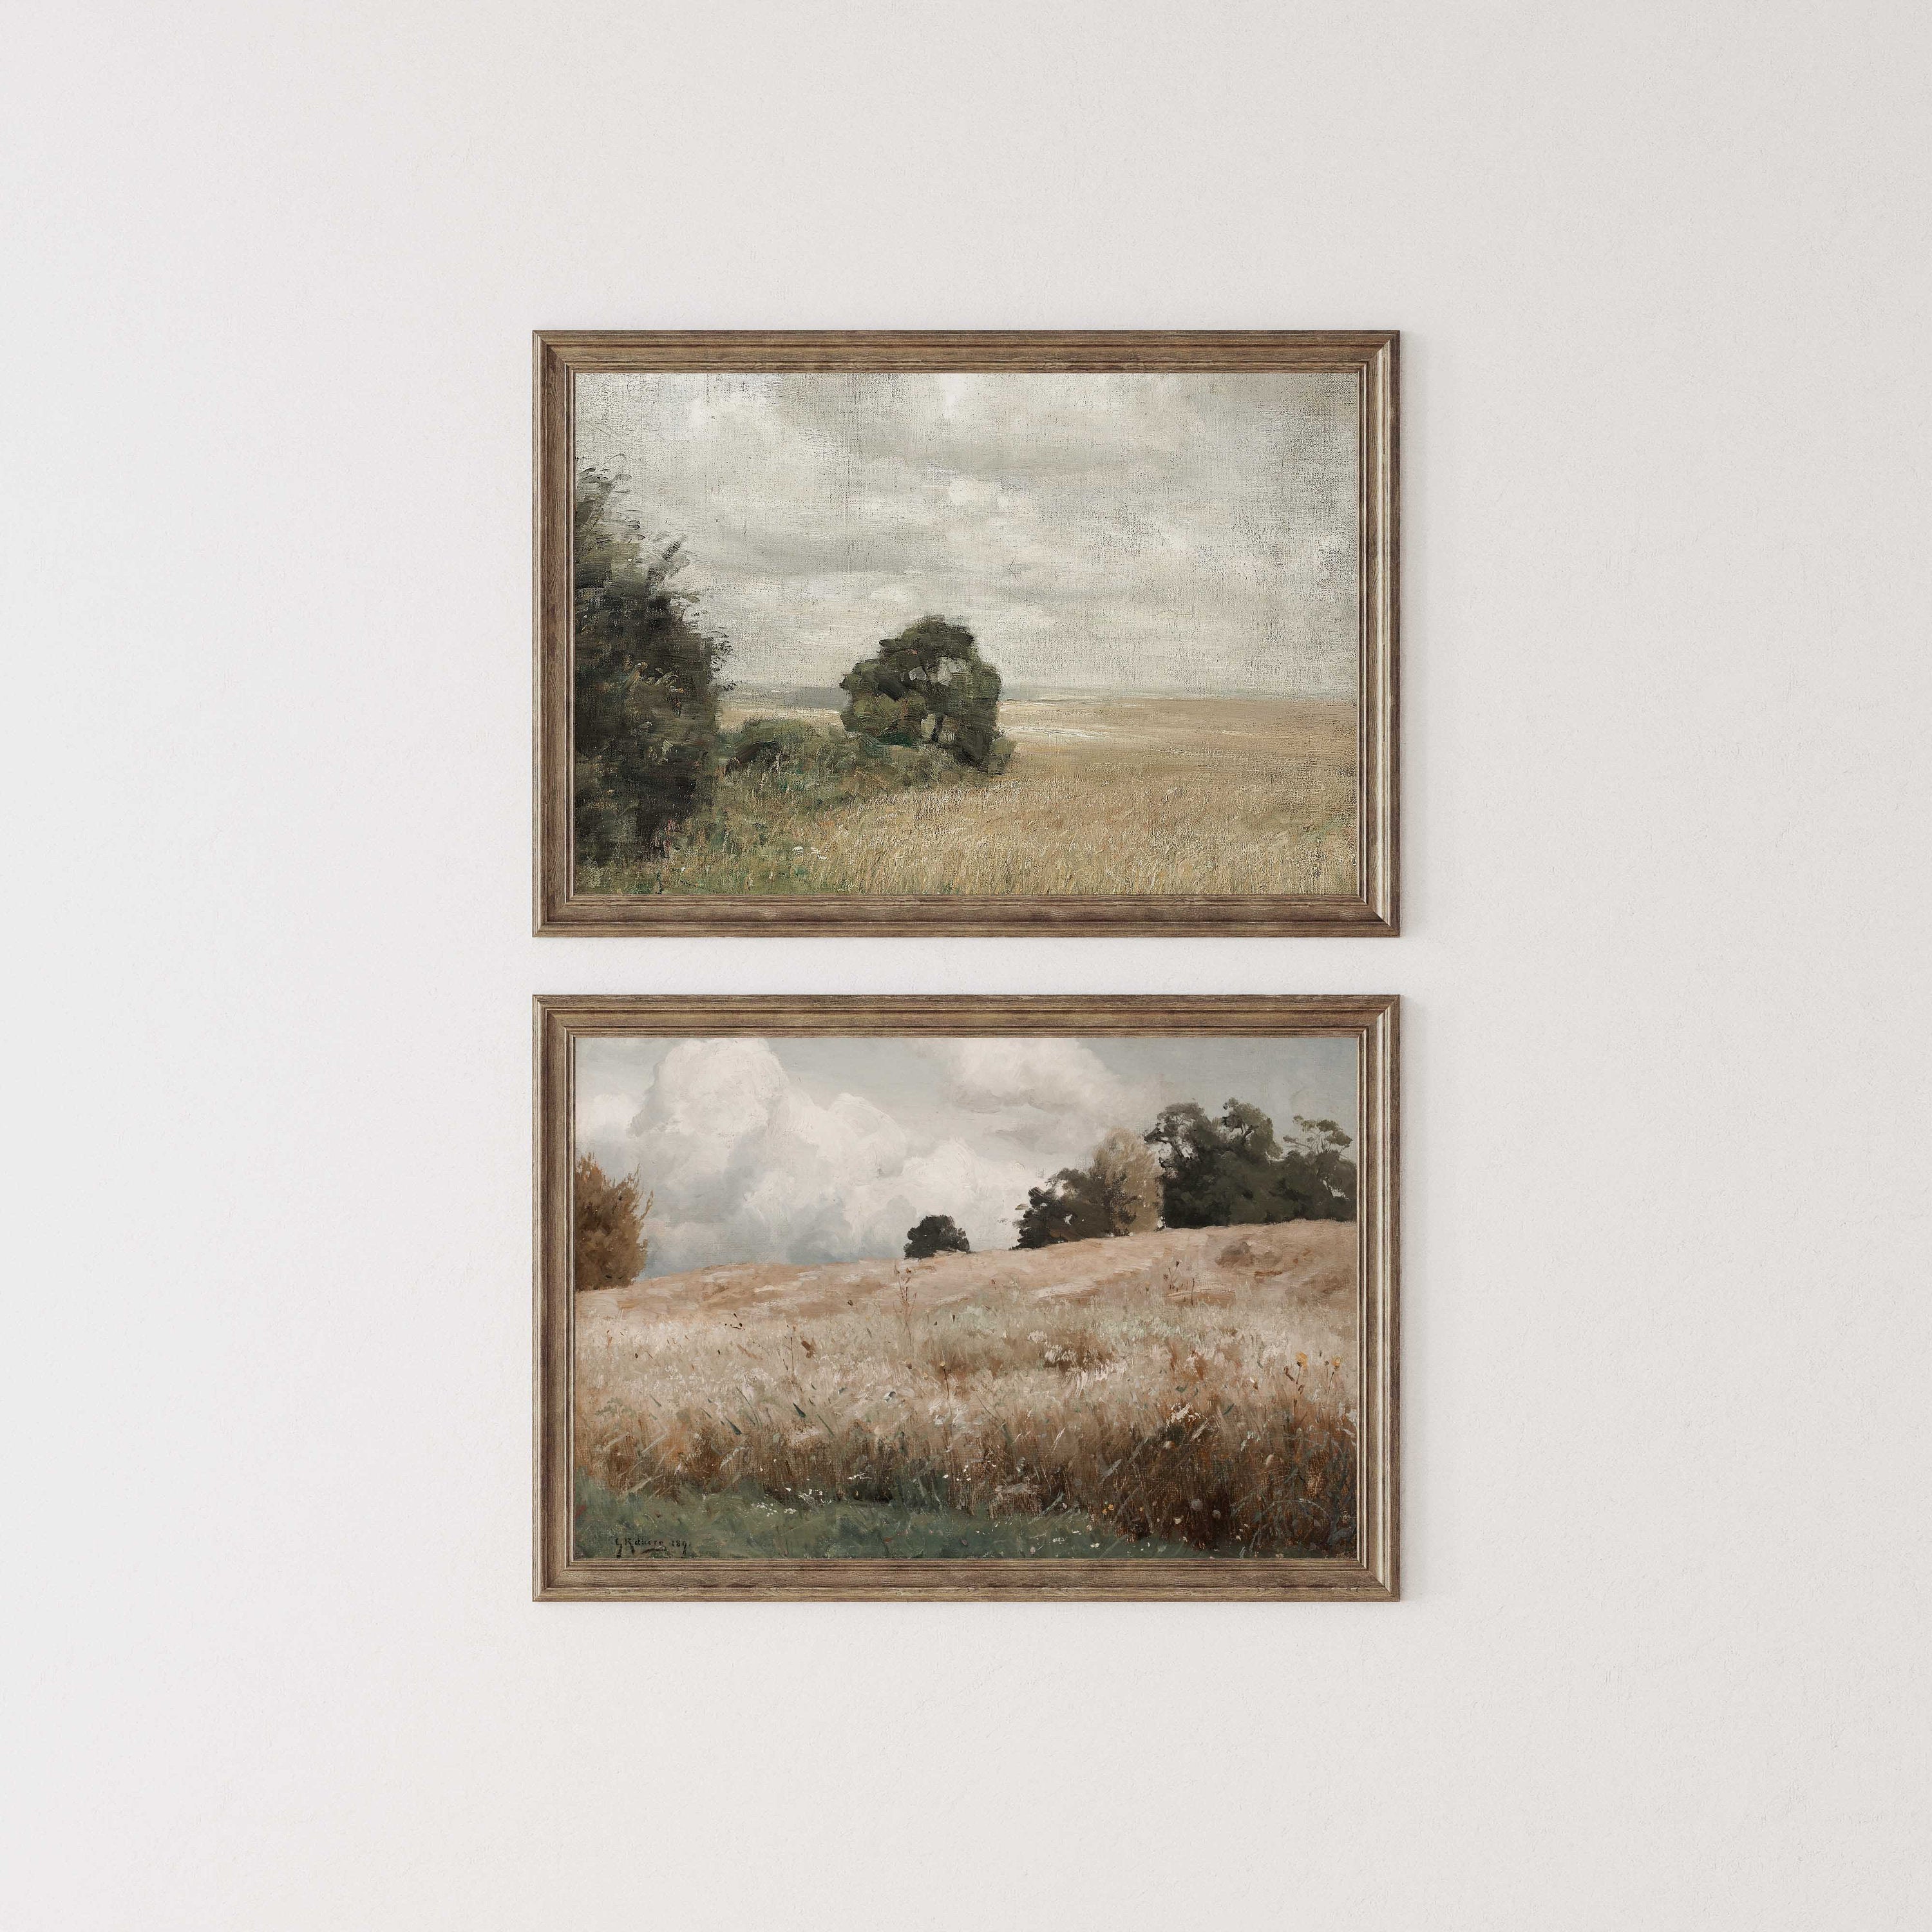 Wheat field Meadow Landscape Painting was created by Gustaf Rydberg